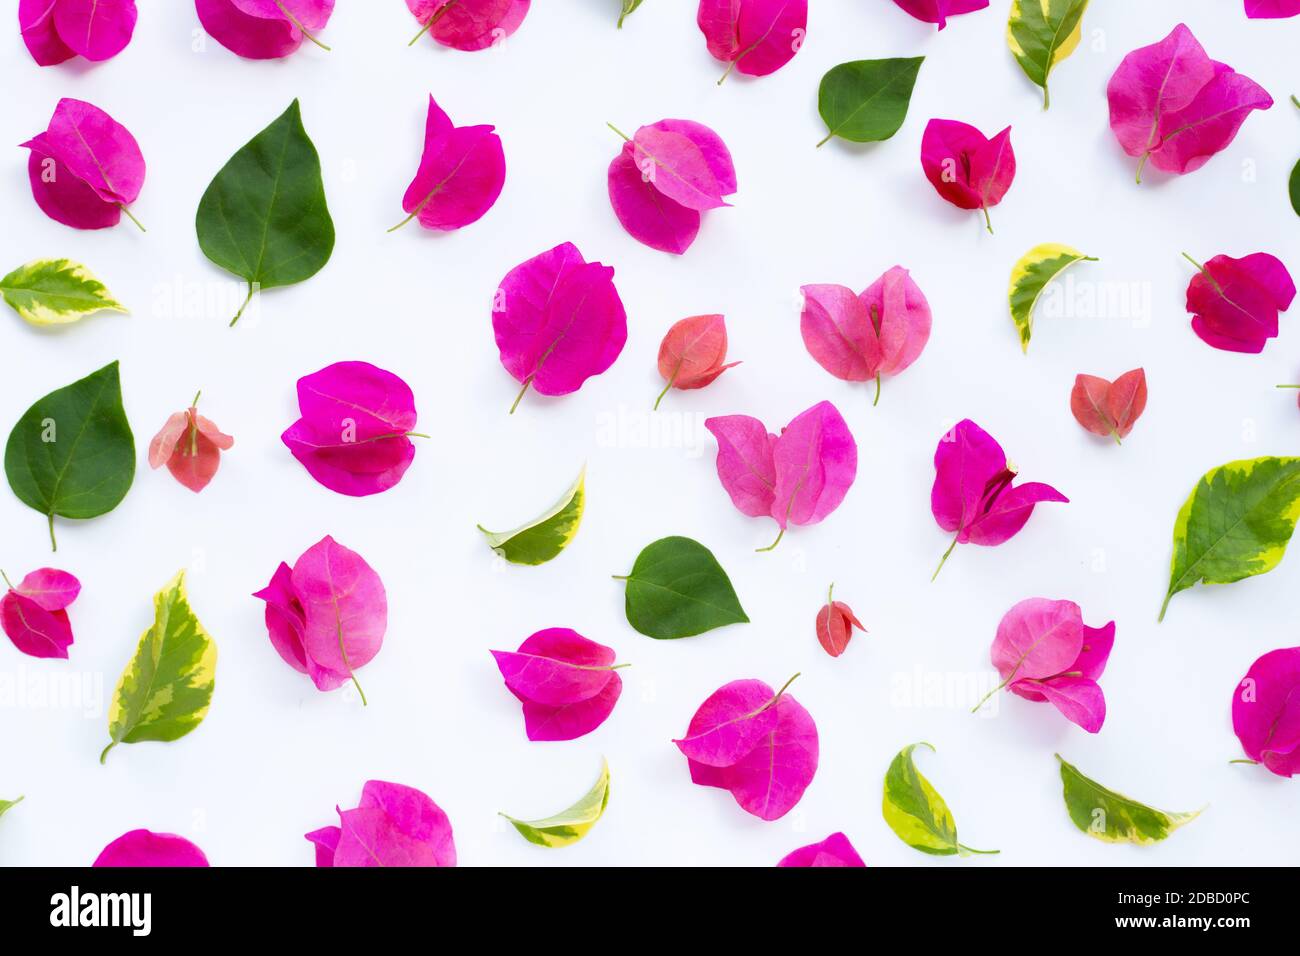 Beautiful red bougainvillea flower with leaves on white background. Stock Photo